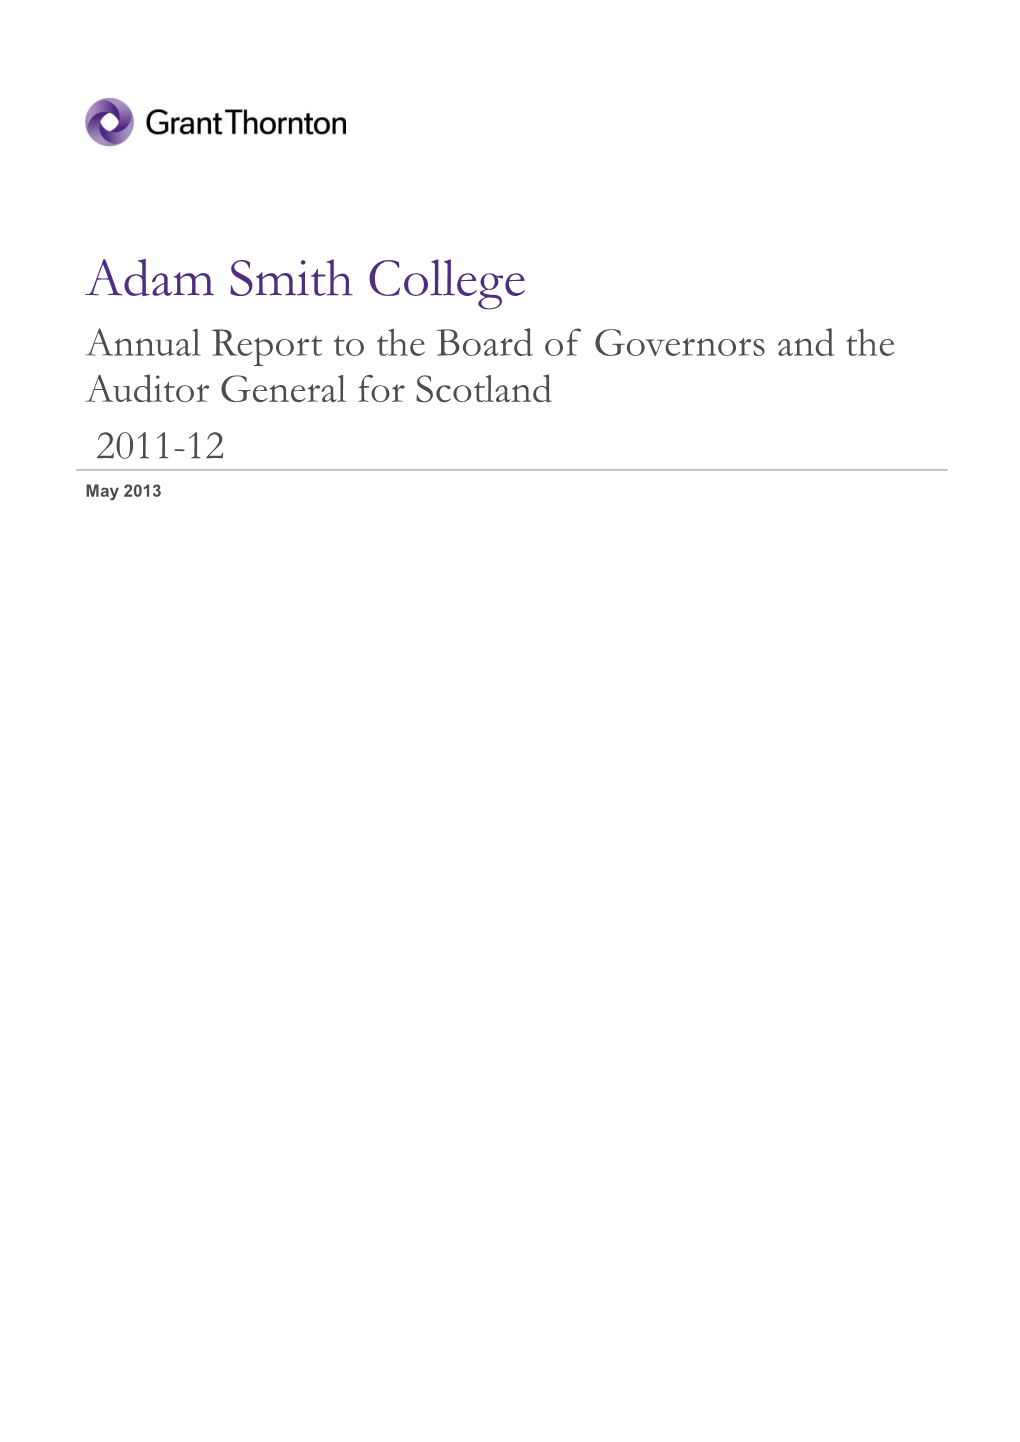 Adam Smith College Annual Report to the Board of Governors and the Auditor General for Scotland 2011-12 May 2013